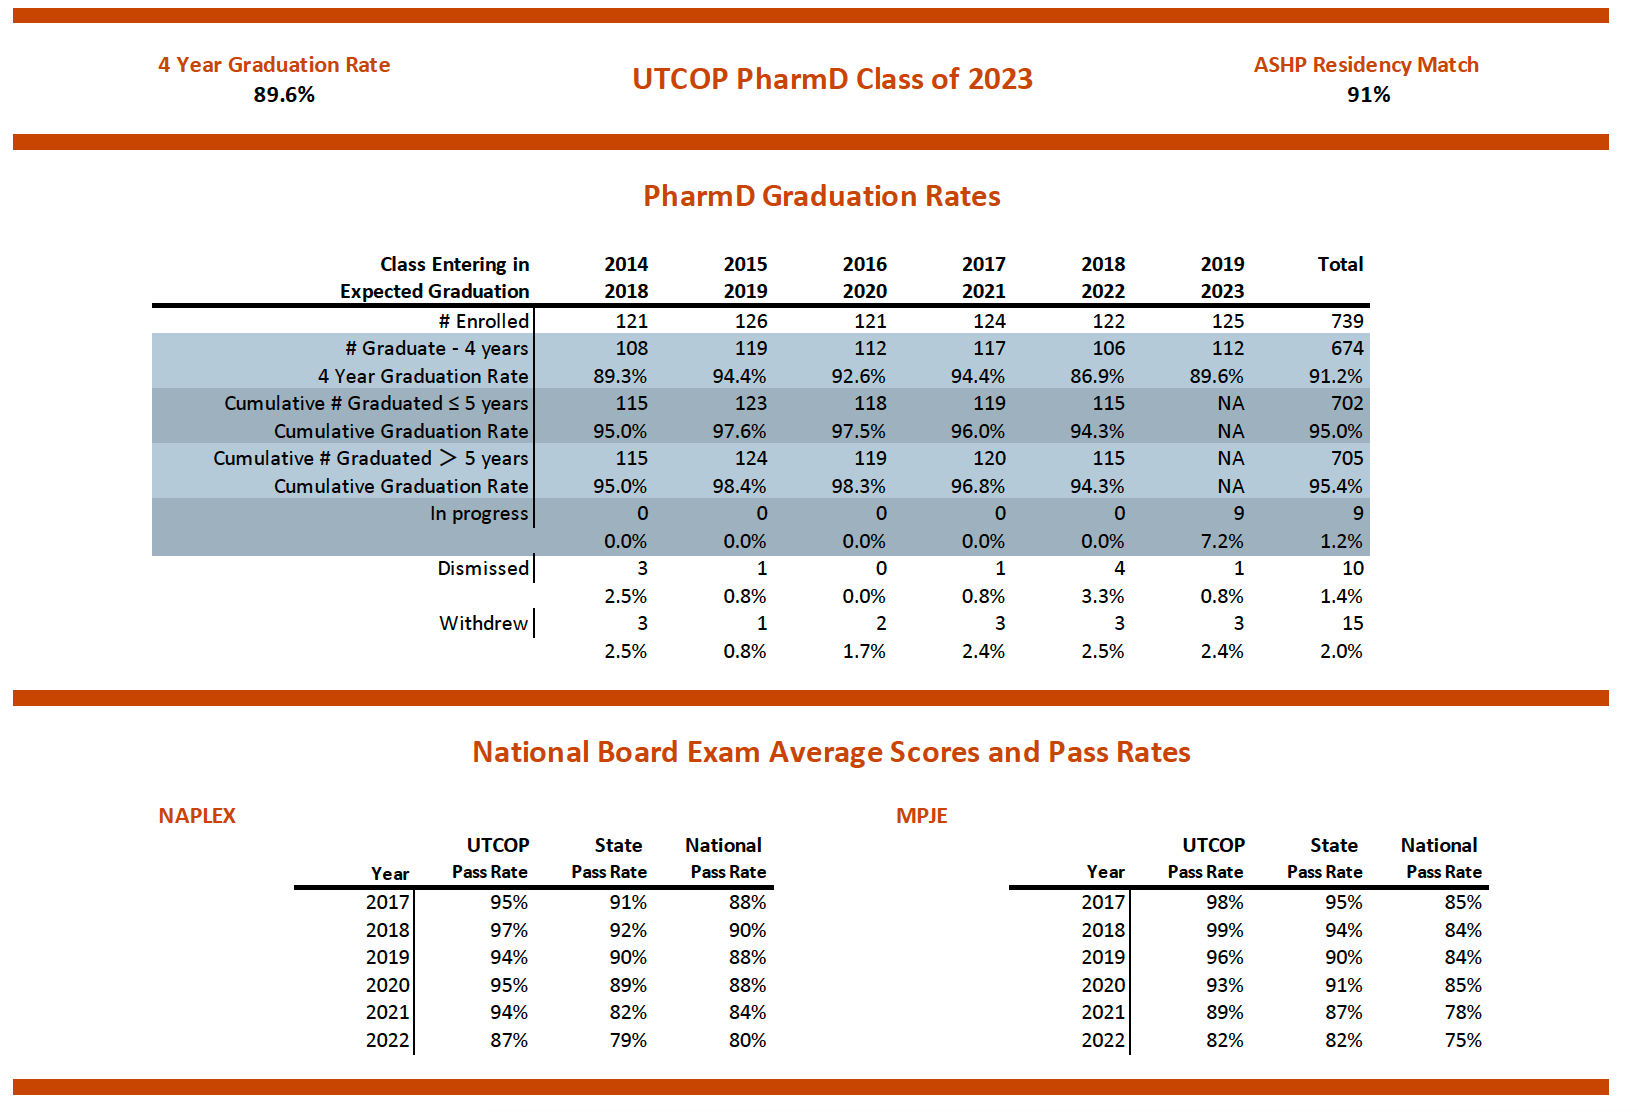 Pharm.D. graduation rates for classes of 2018 to 2023 and exam statistics for 2017 to 2022